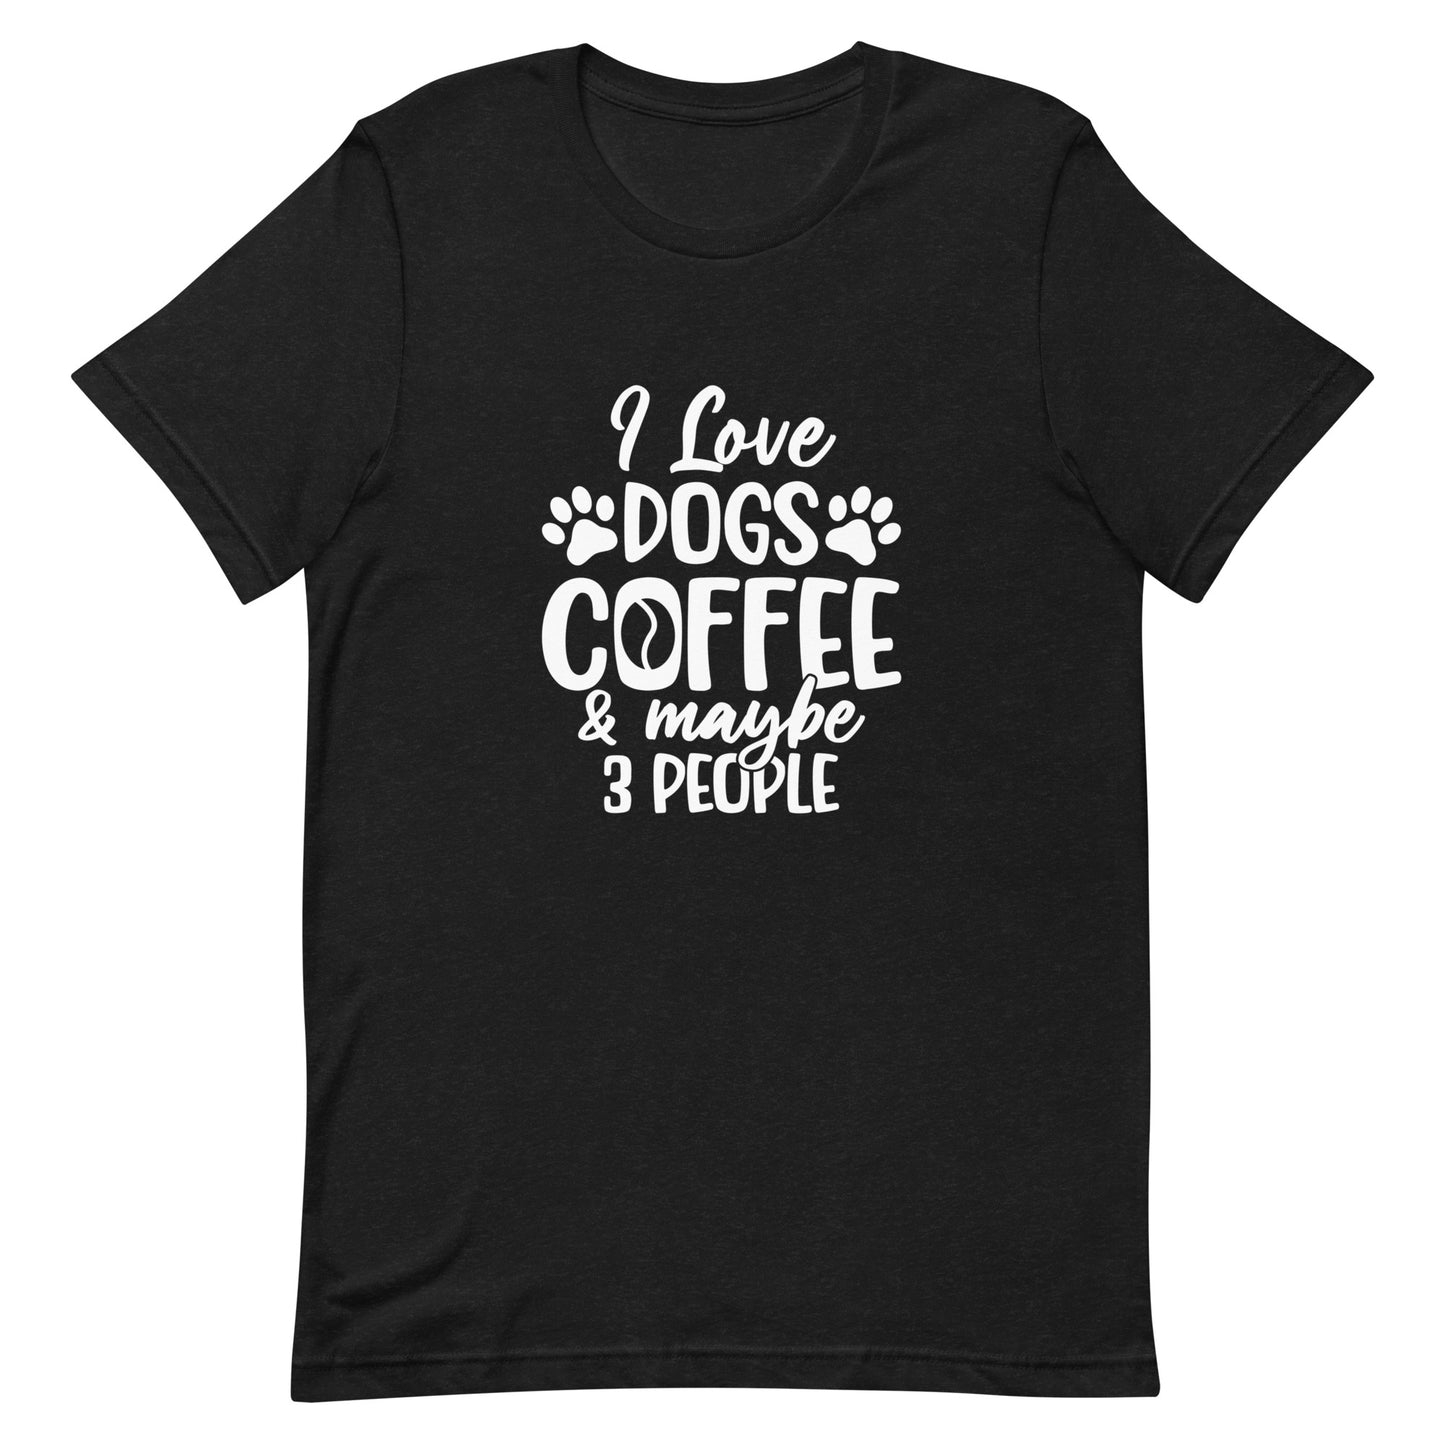 I Love Dogs Coffee & Maybe 3 People Unisex t-shirt